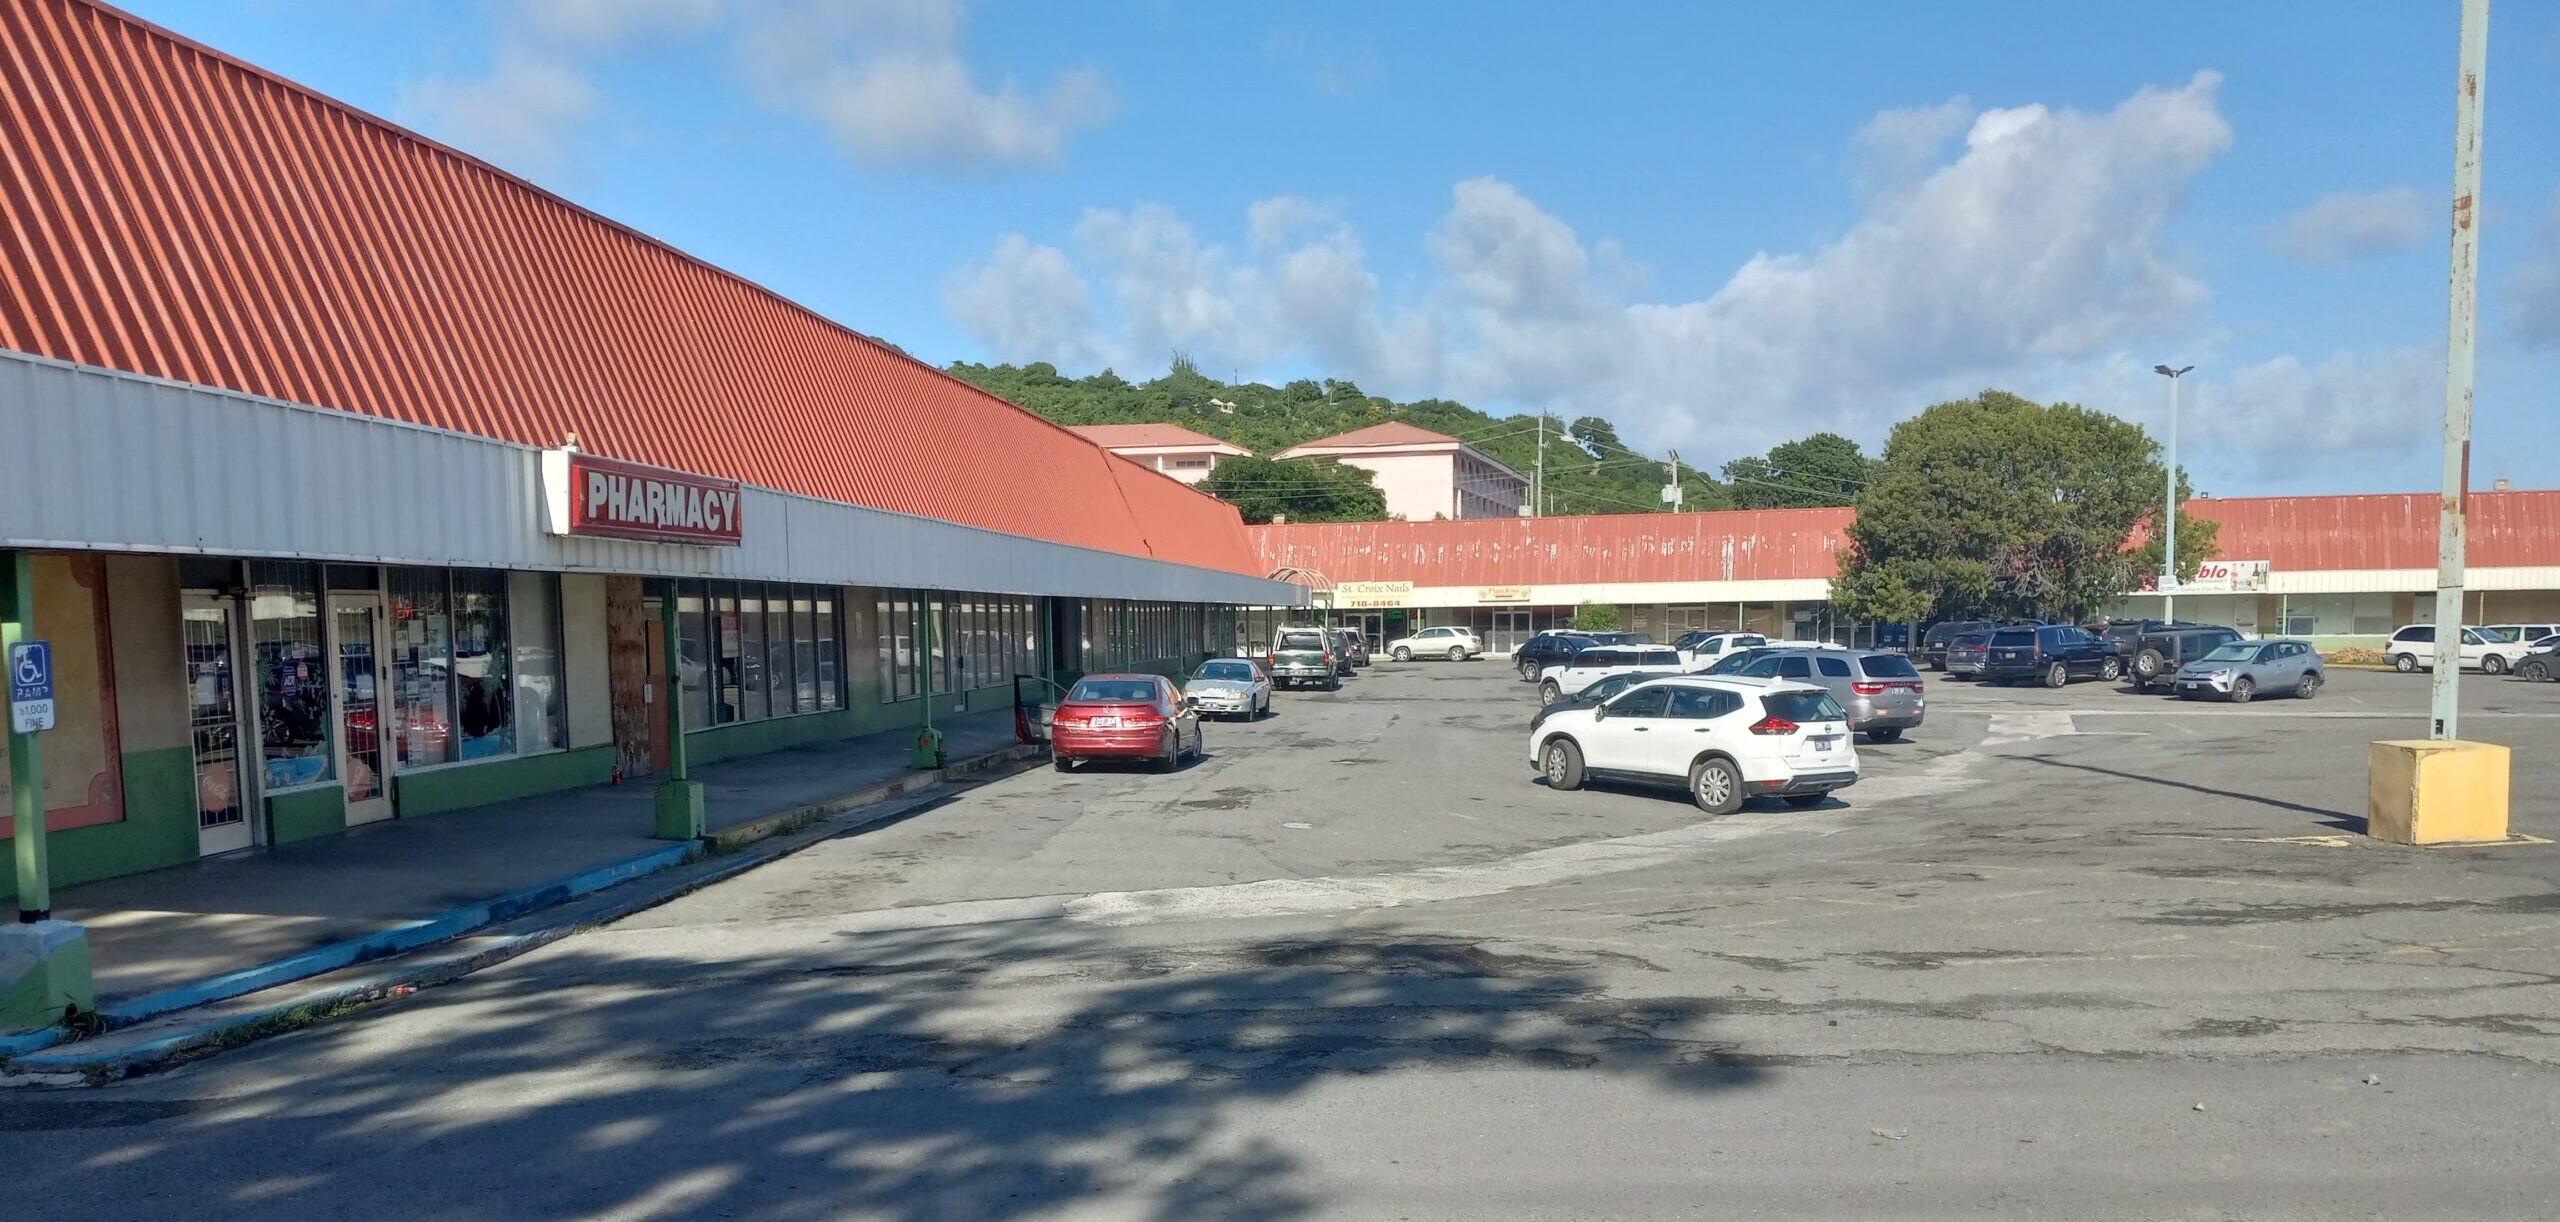 The Golden Rock Shopping Center on St. Croix, where many of the stores sit empty. (Photo by Olasee Davis)